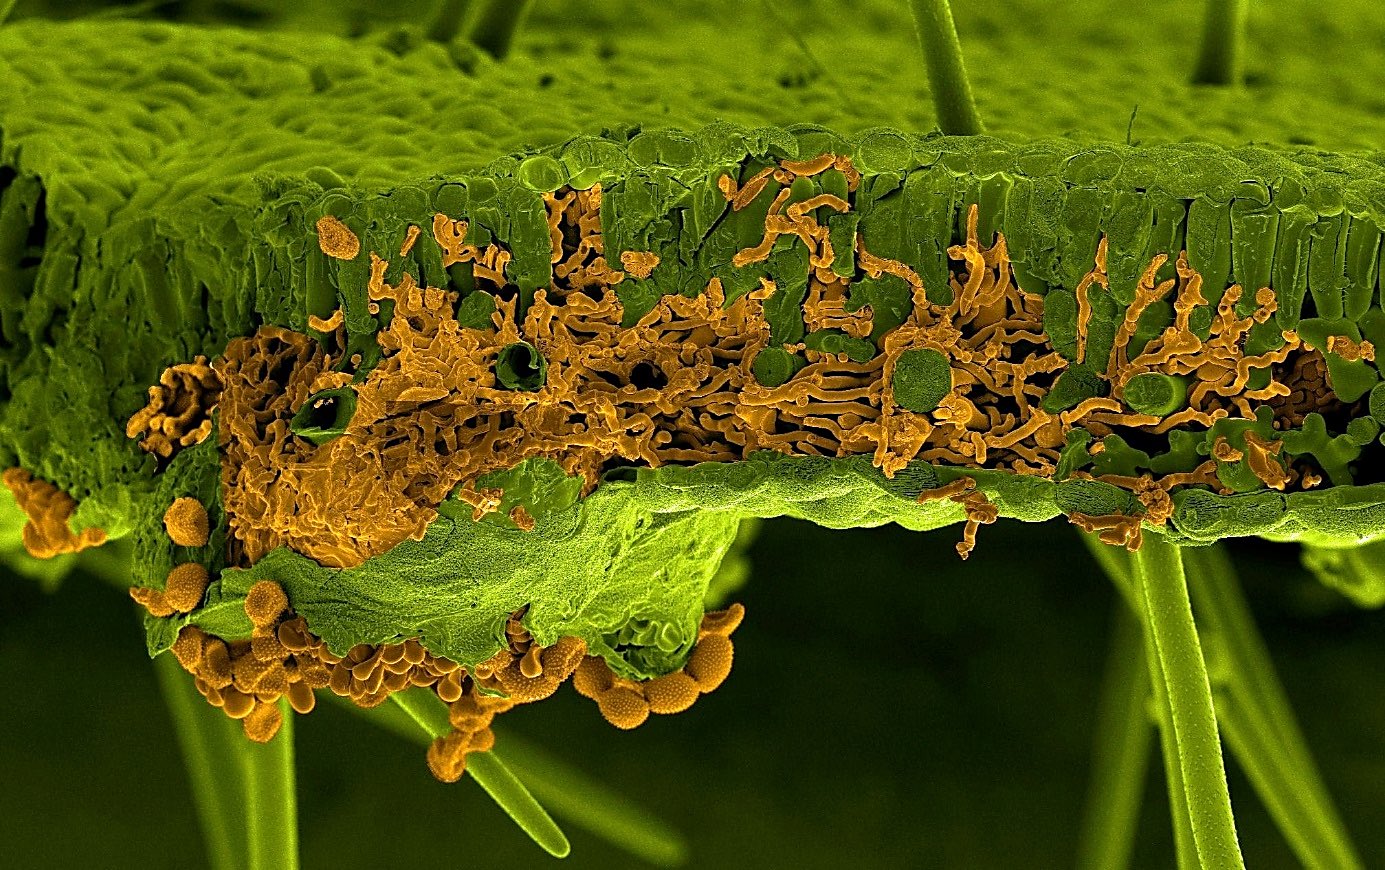 Scanning electron microscopy picture of a soybean leaf infected by the rust fungus Phakopsora pachyrhizi. The leaf and the fungus were artificially painted in green and in orange, respectively. The section shows invading infection hyphae of the fungus inside the leaf mesophyll, whereas the spores are visible below the leaf breaking through the lower epidermis (Picture by U. Steffens, Bayer Crop Science).